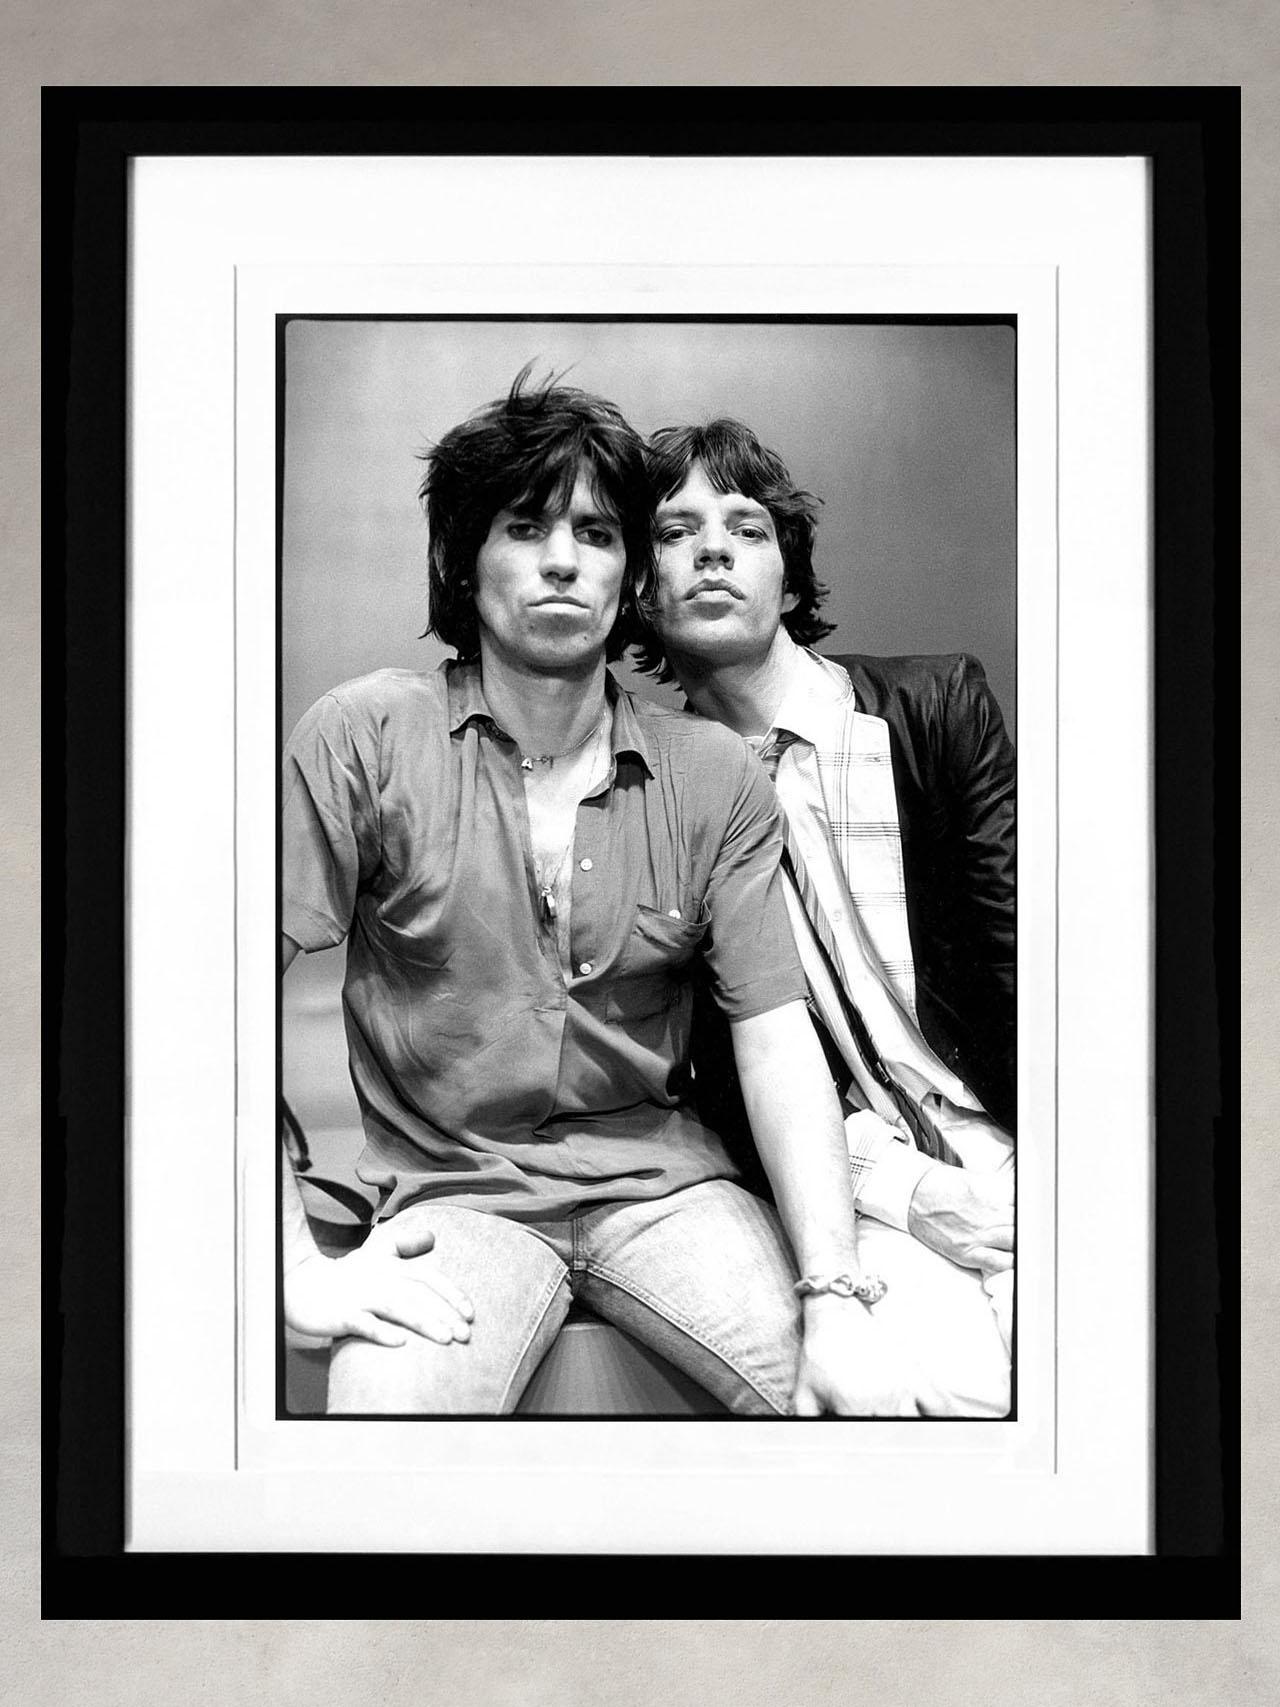 Keith Richards & Mick Jagger by Michael Putland image number 1